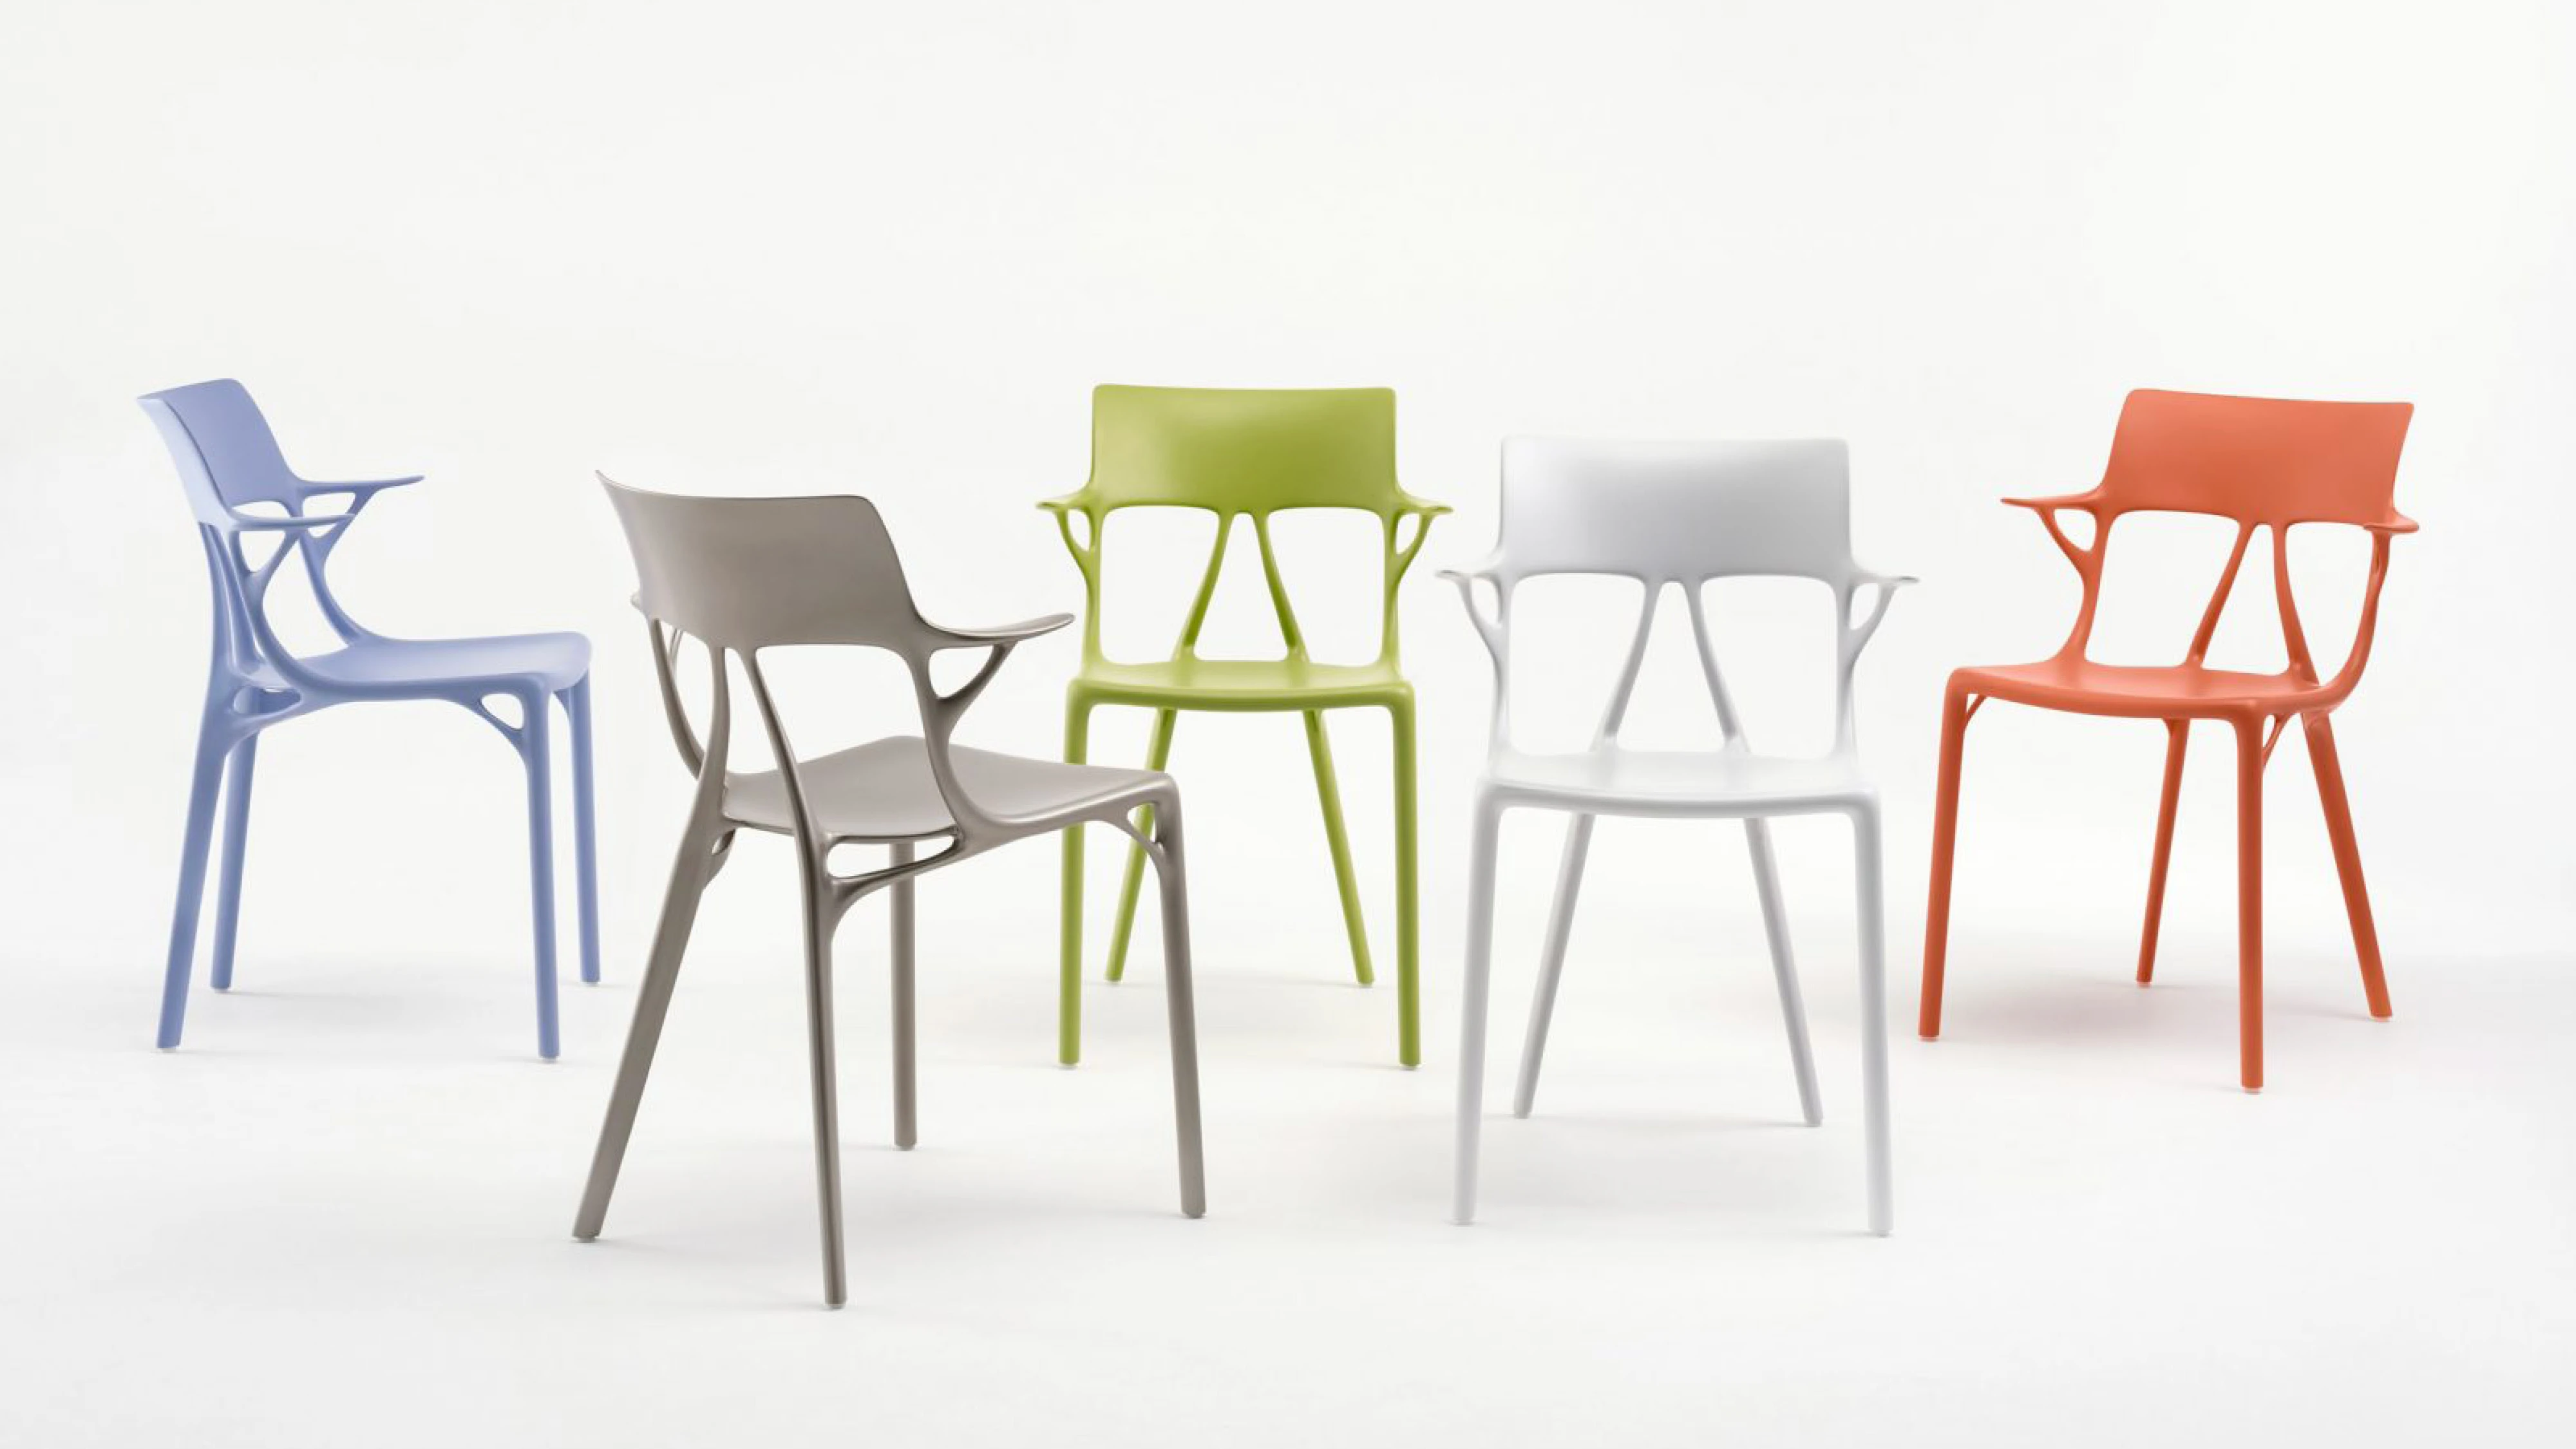 A.I. Chair Kartell